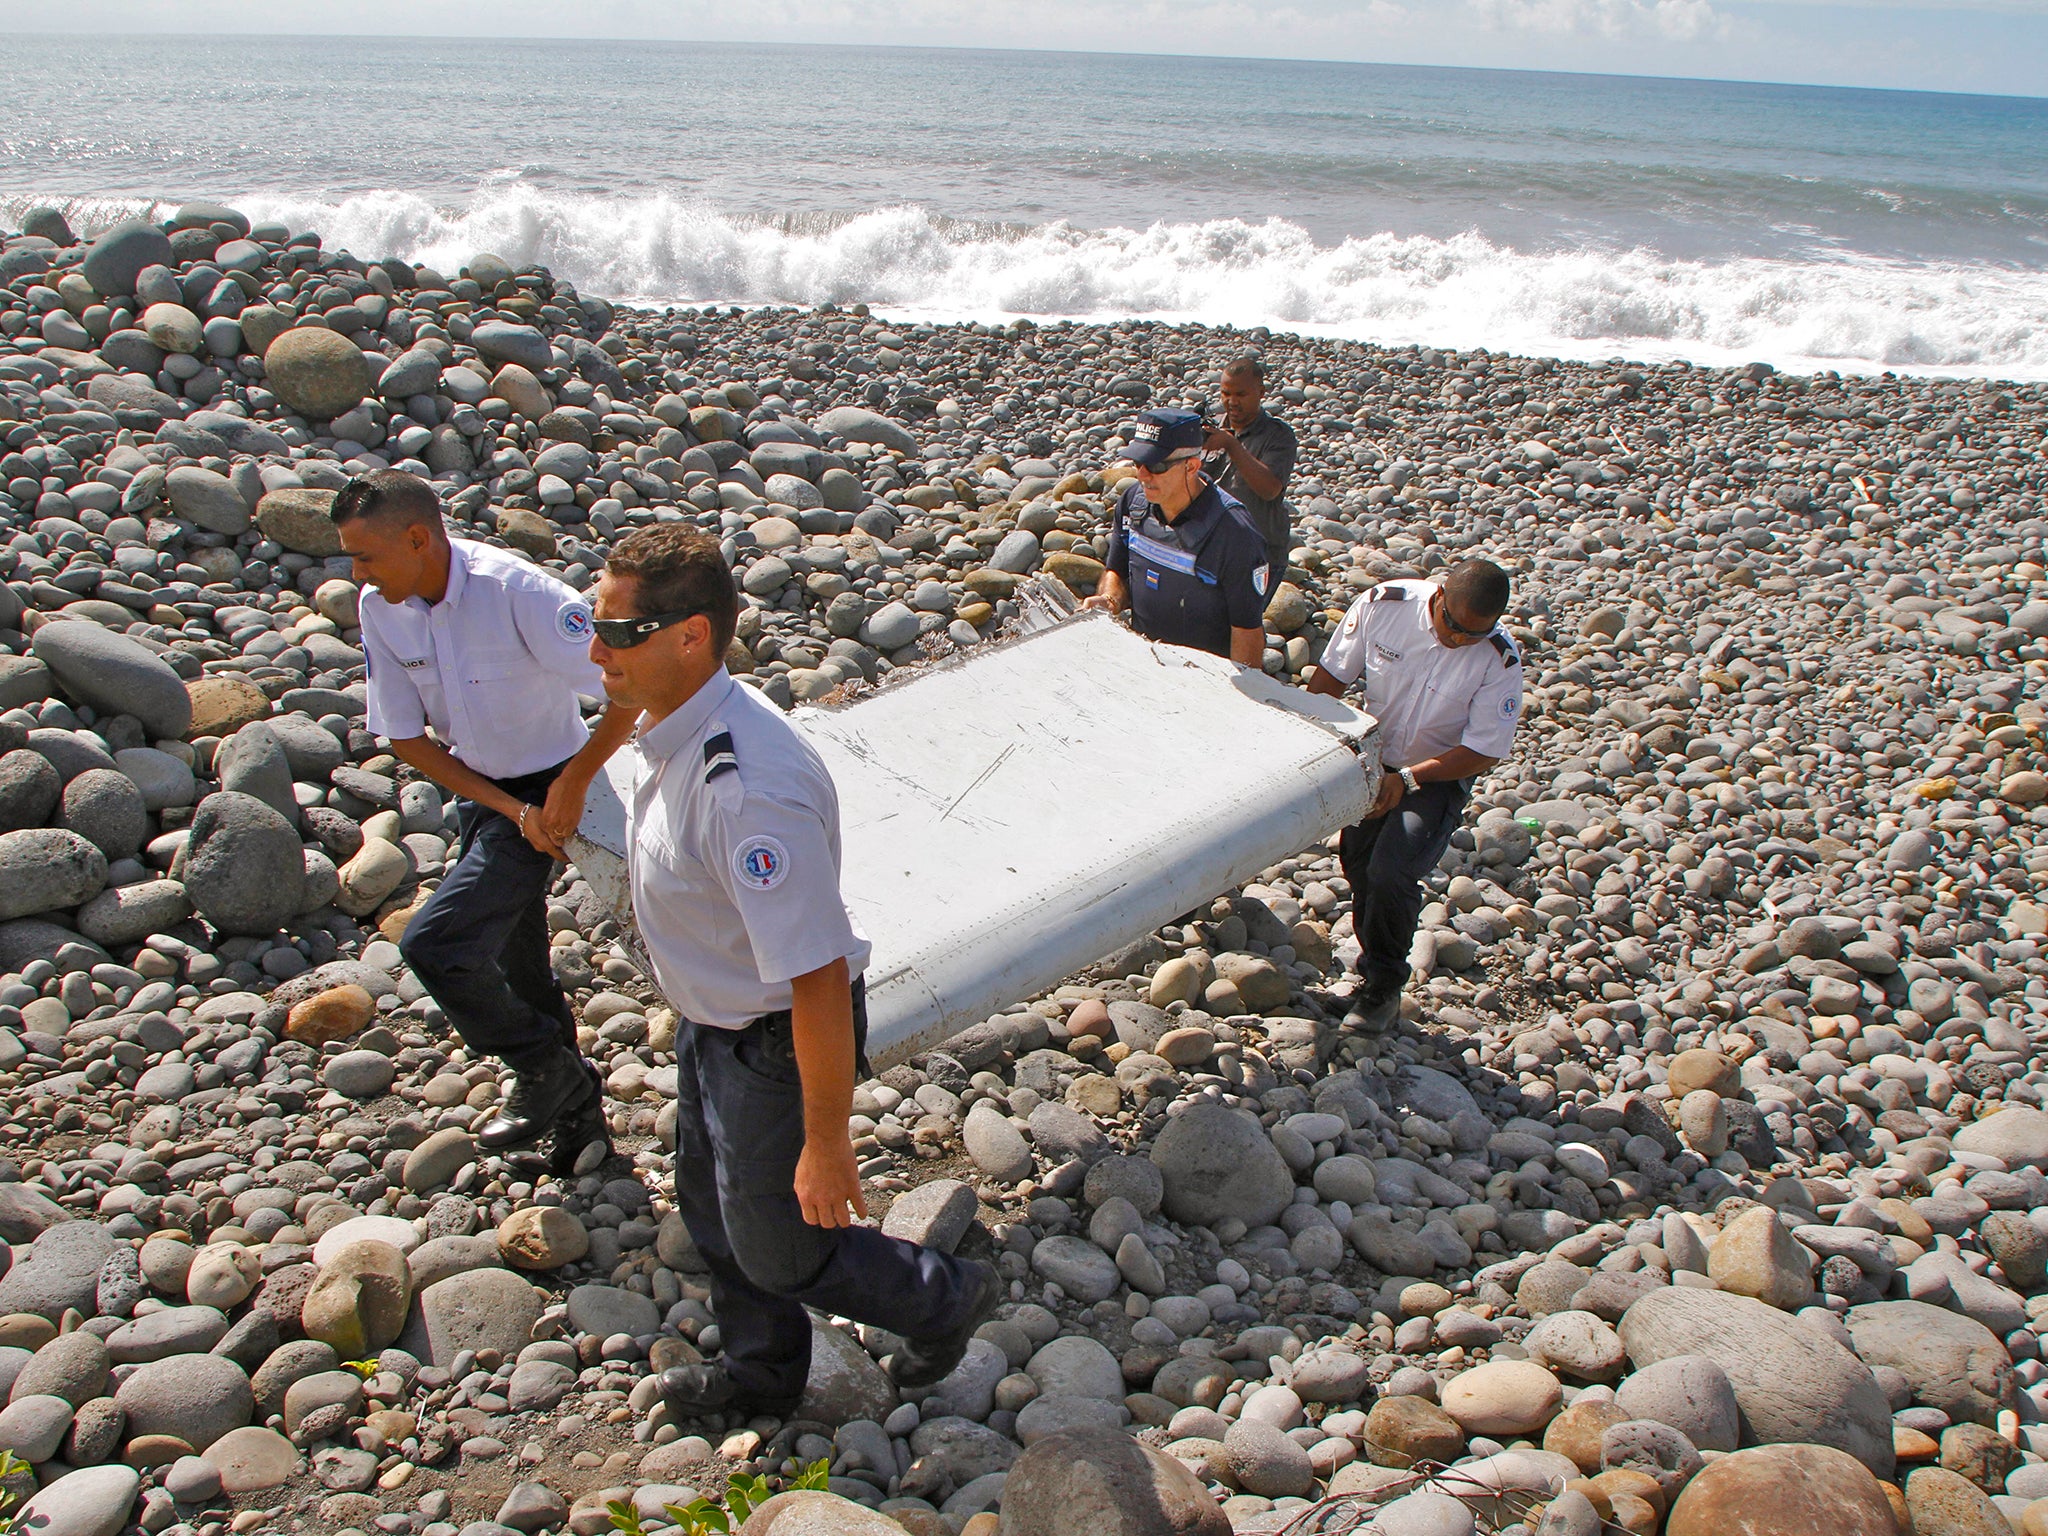 French police officers carry a piece of debris - identified as a 'flaperon' from the trailing edge of a Boeing 777 wing - in Saint-Andre, Reunion Island